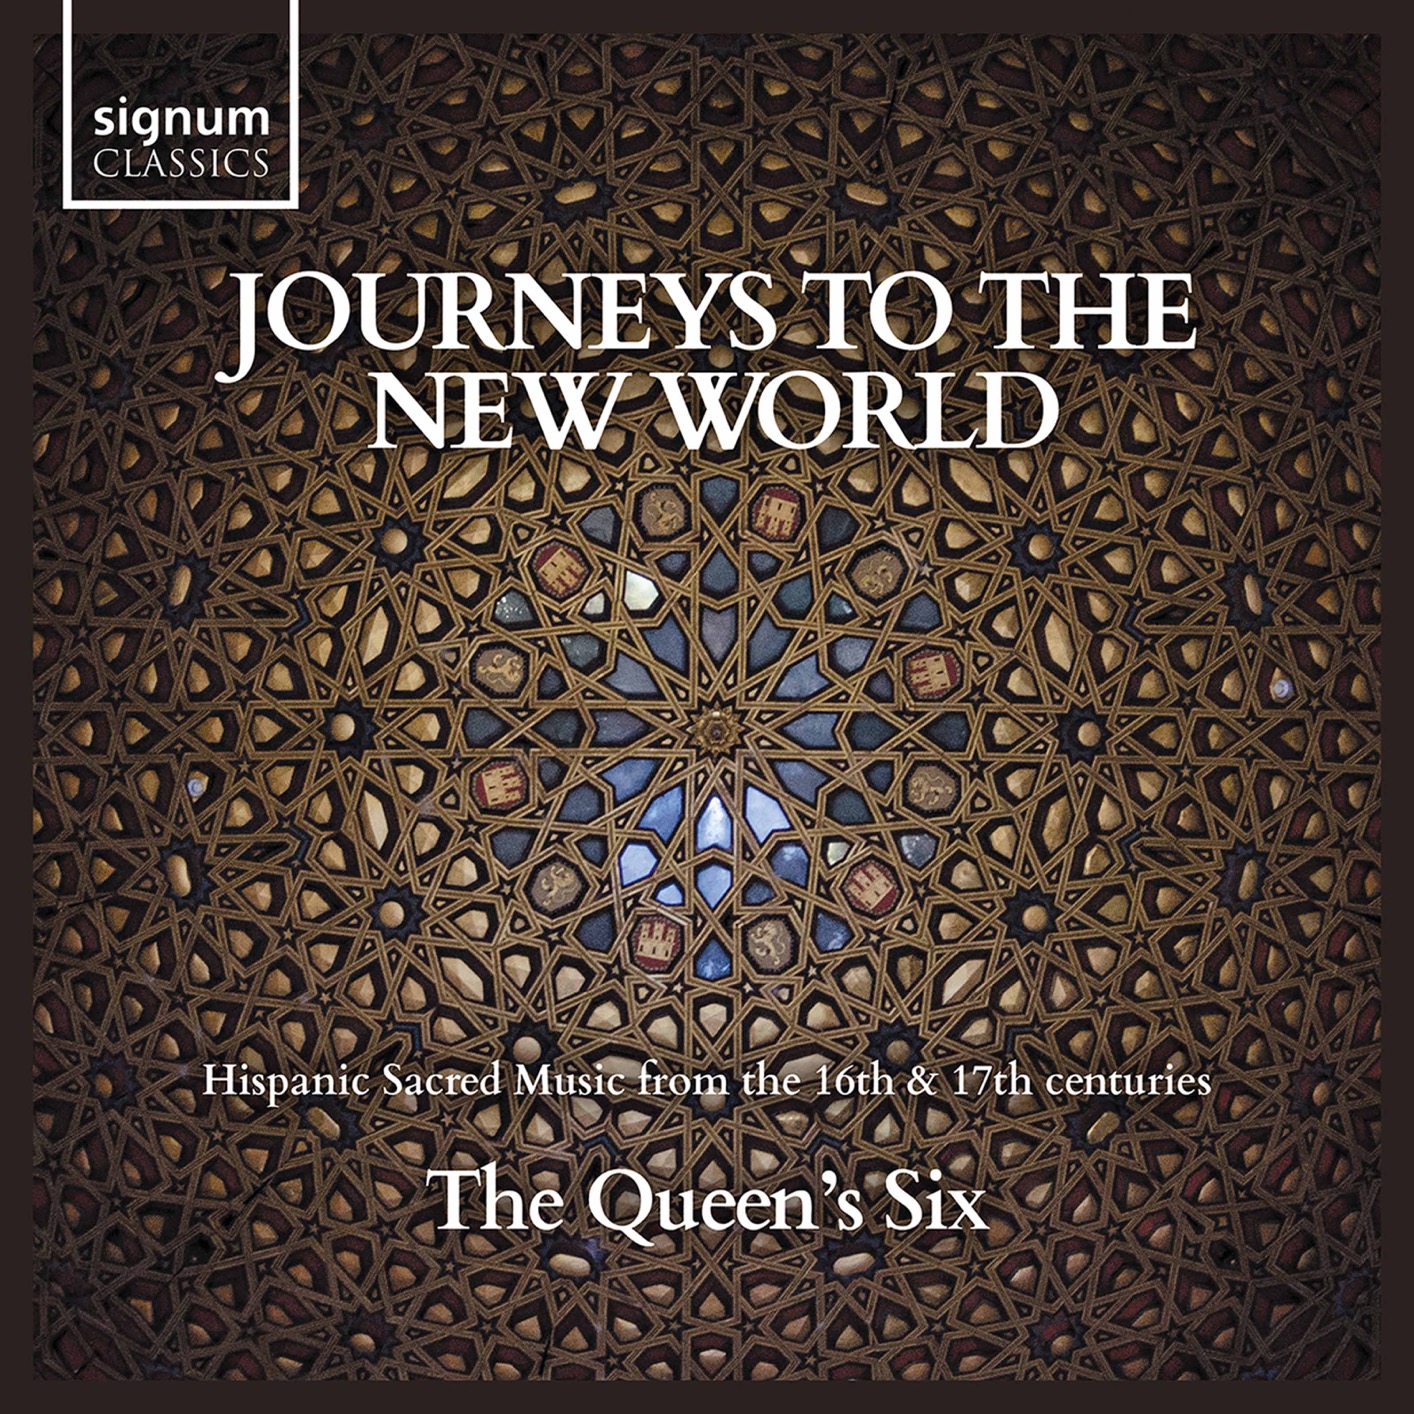 The Queen’s Six – Journeys to the New World (2020) [FLAC 24bit/192kHz]